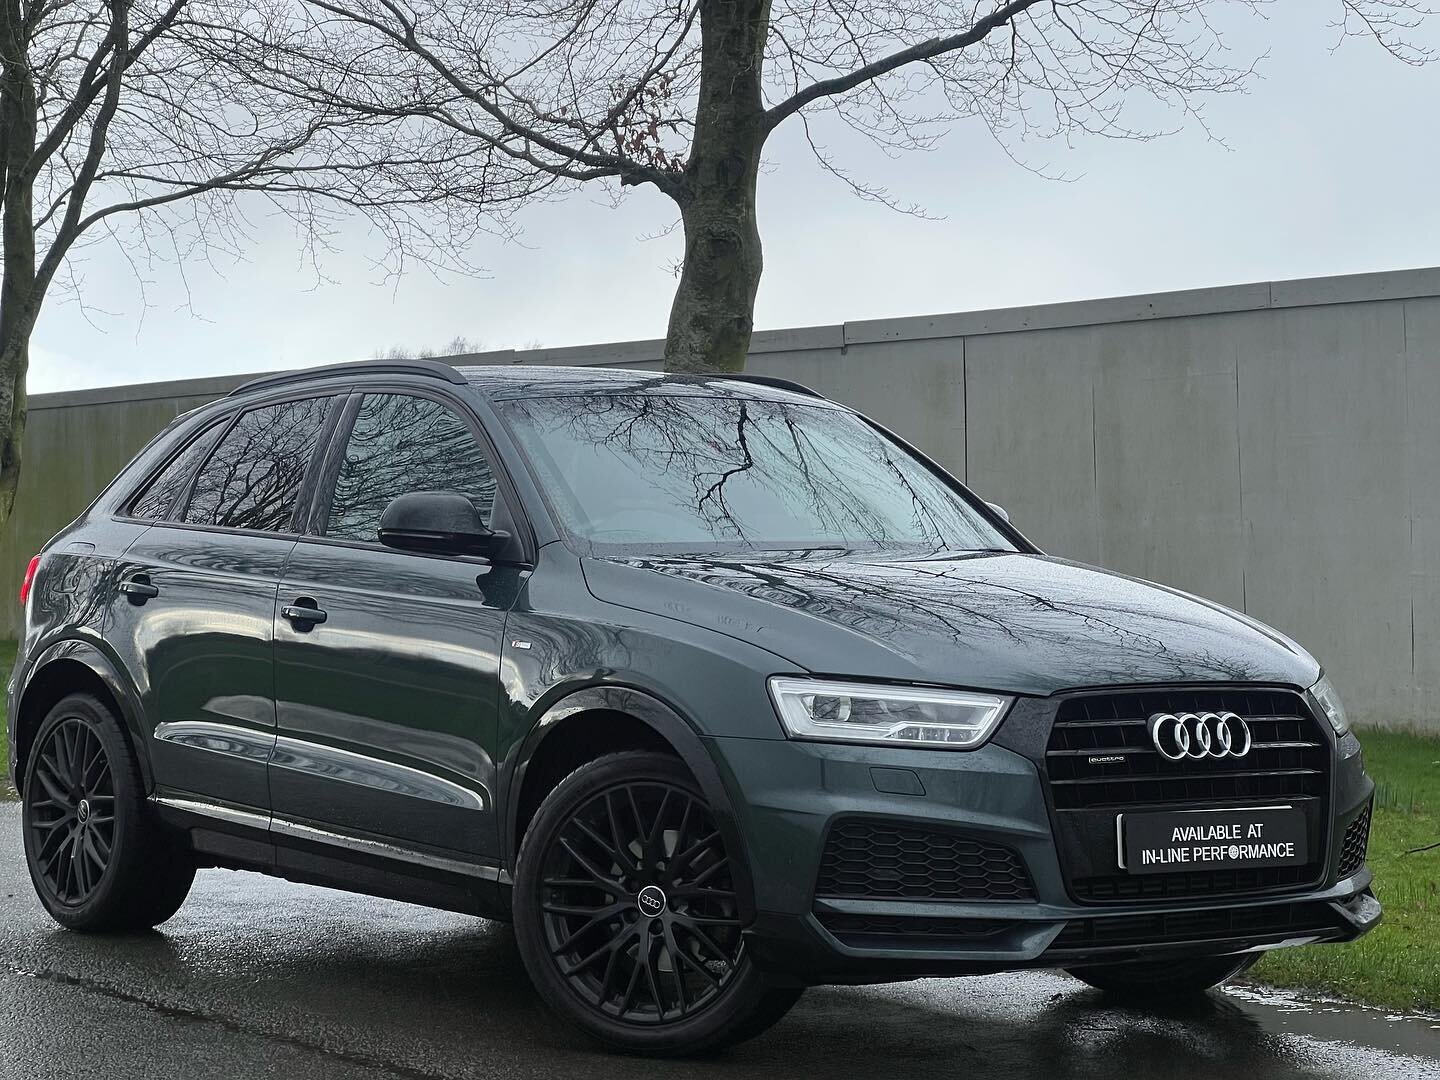 Here At IN-LINE PERFORMANCE We Take Pride And Joy Into Supplying You With Great Quality Of German Engineering. We Are Proud To Present To You This 2018 Q3 Quattro Finished In A Rare Metallic Low Profile Camouflage Green With Black S Line Sports Seats